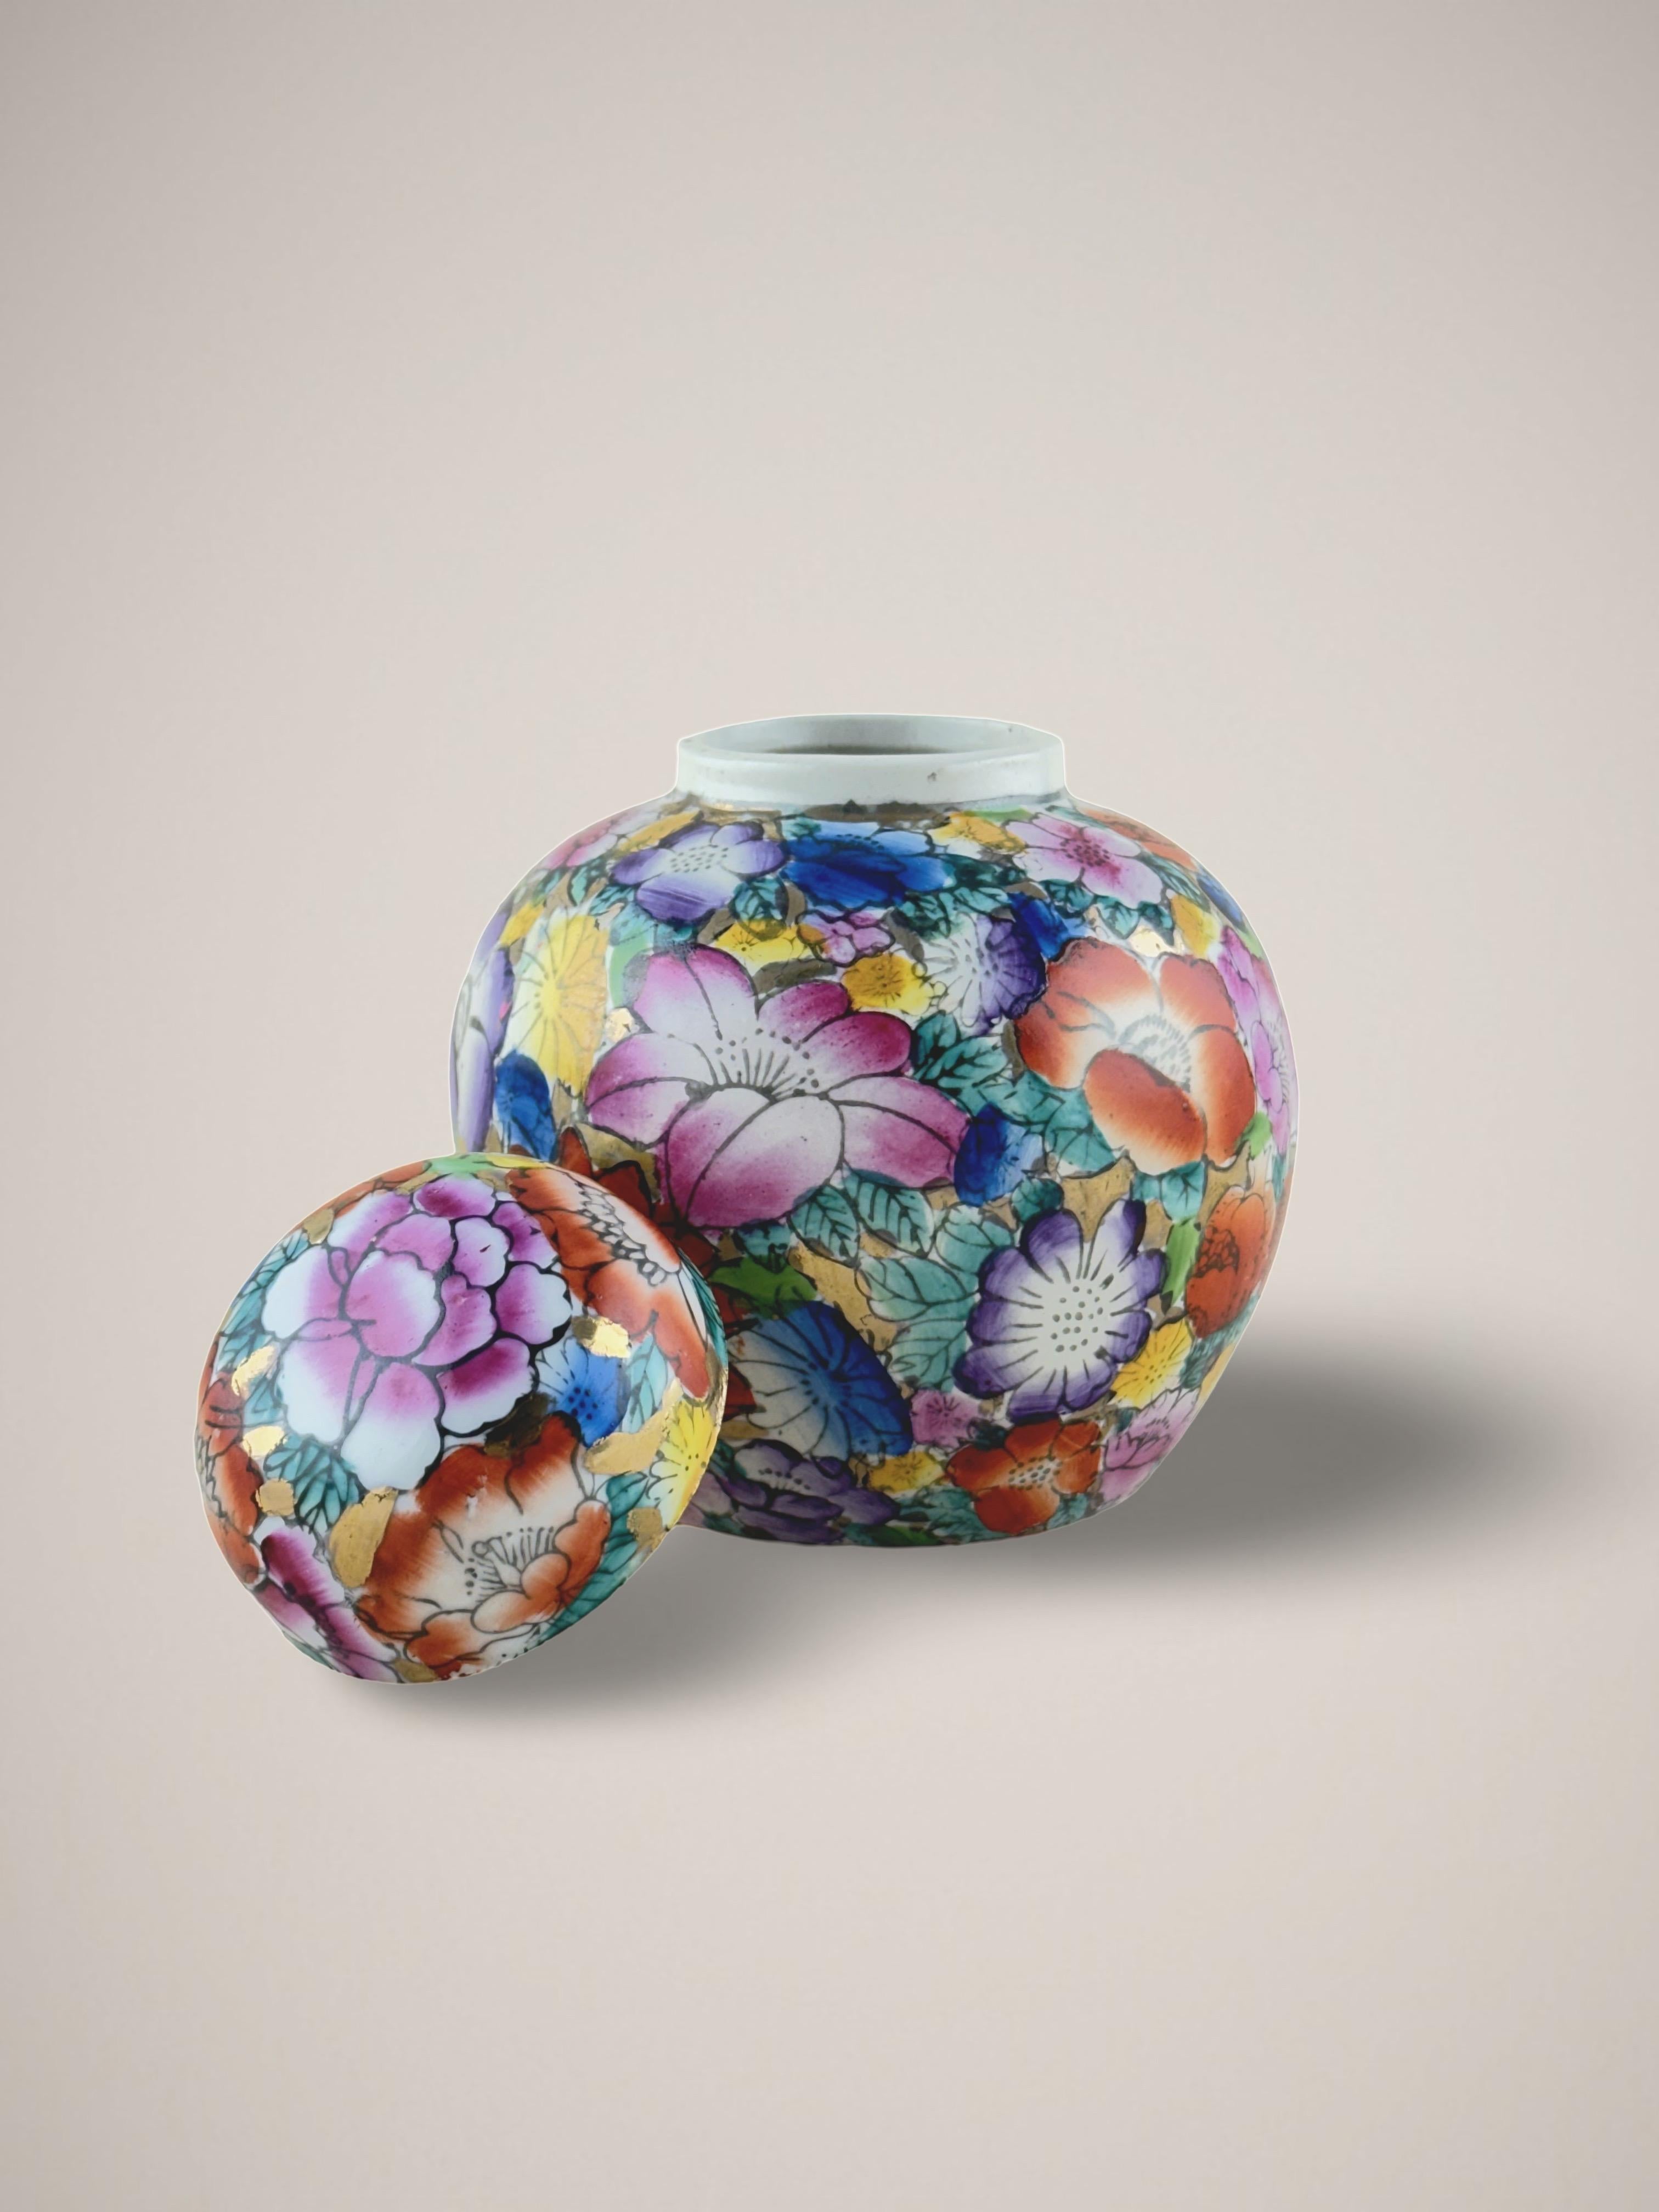 A small porcelain ginger jar, crafted in China during the 1980s.

Hand-painted with the bright and colorful Chinese 'Mille Fleur' style, meaning 'Thousand Flowers'. This vibrant style is characterized by a dense tapestry of blooming flowers: